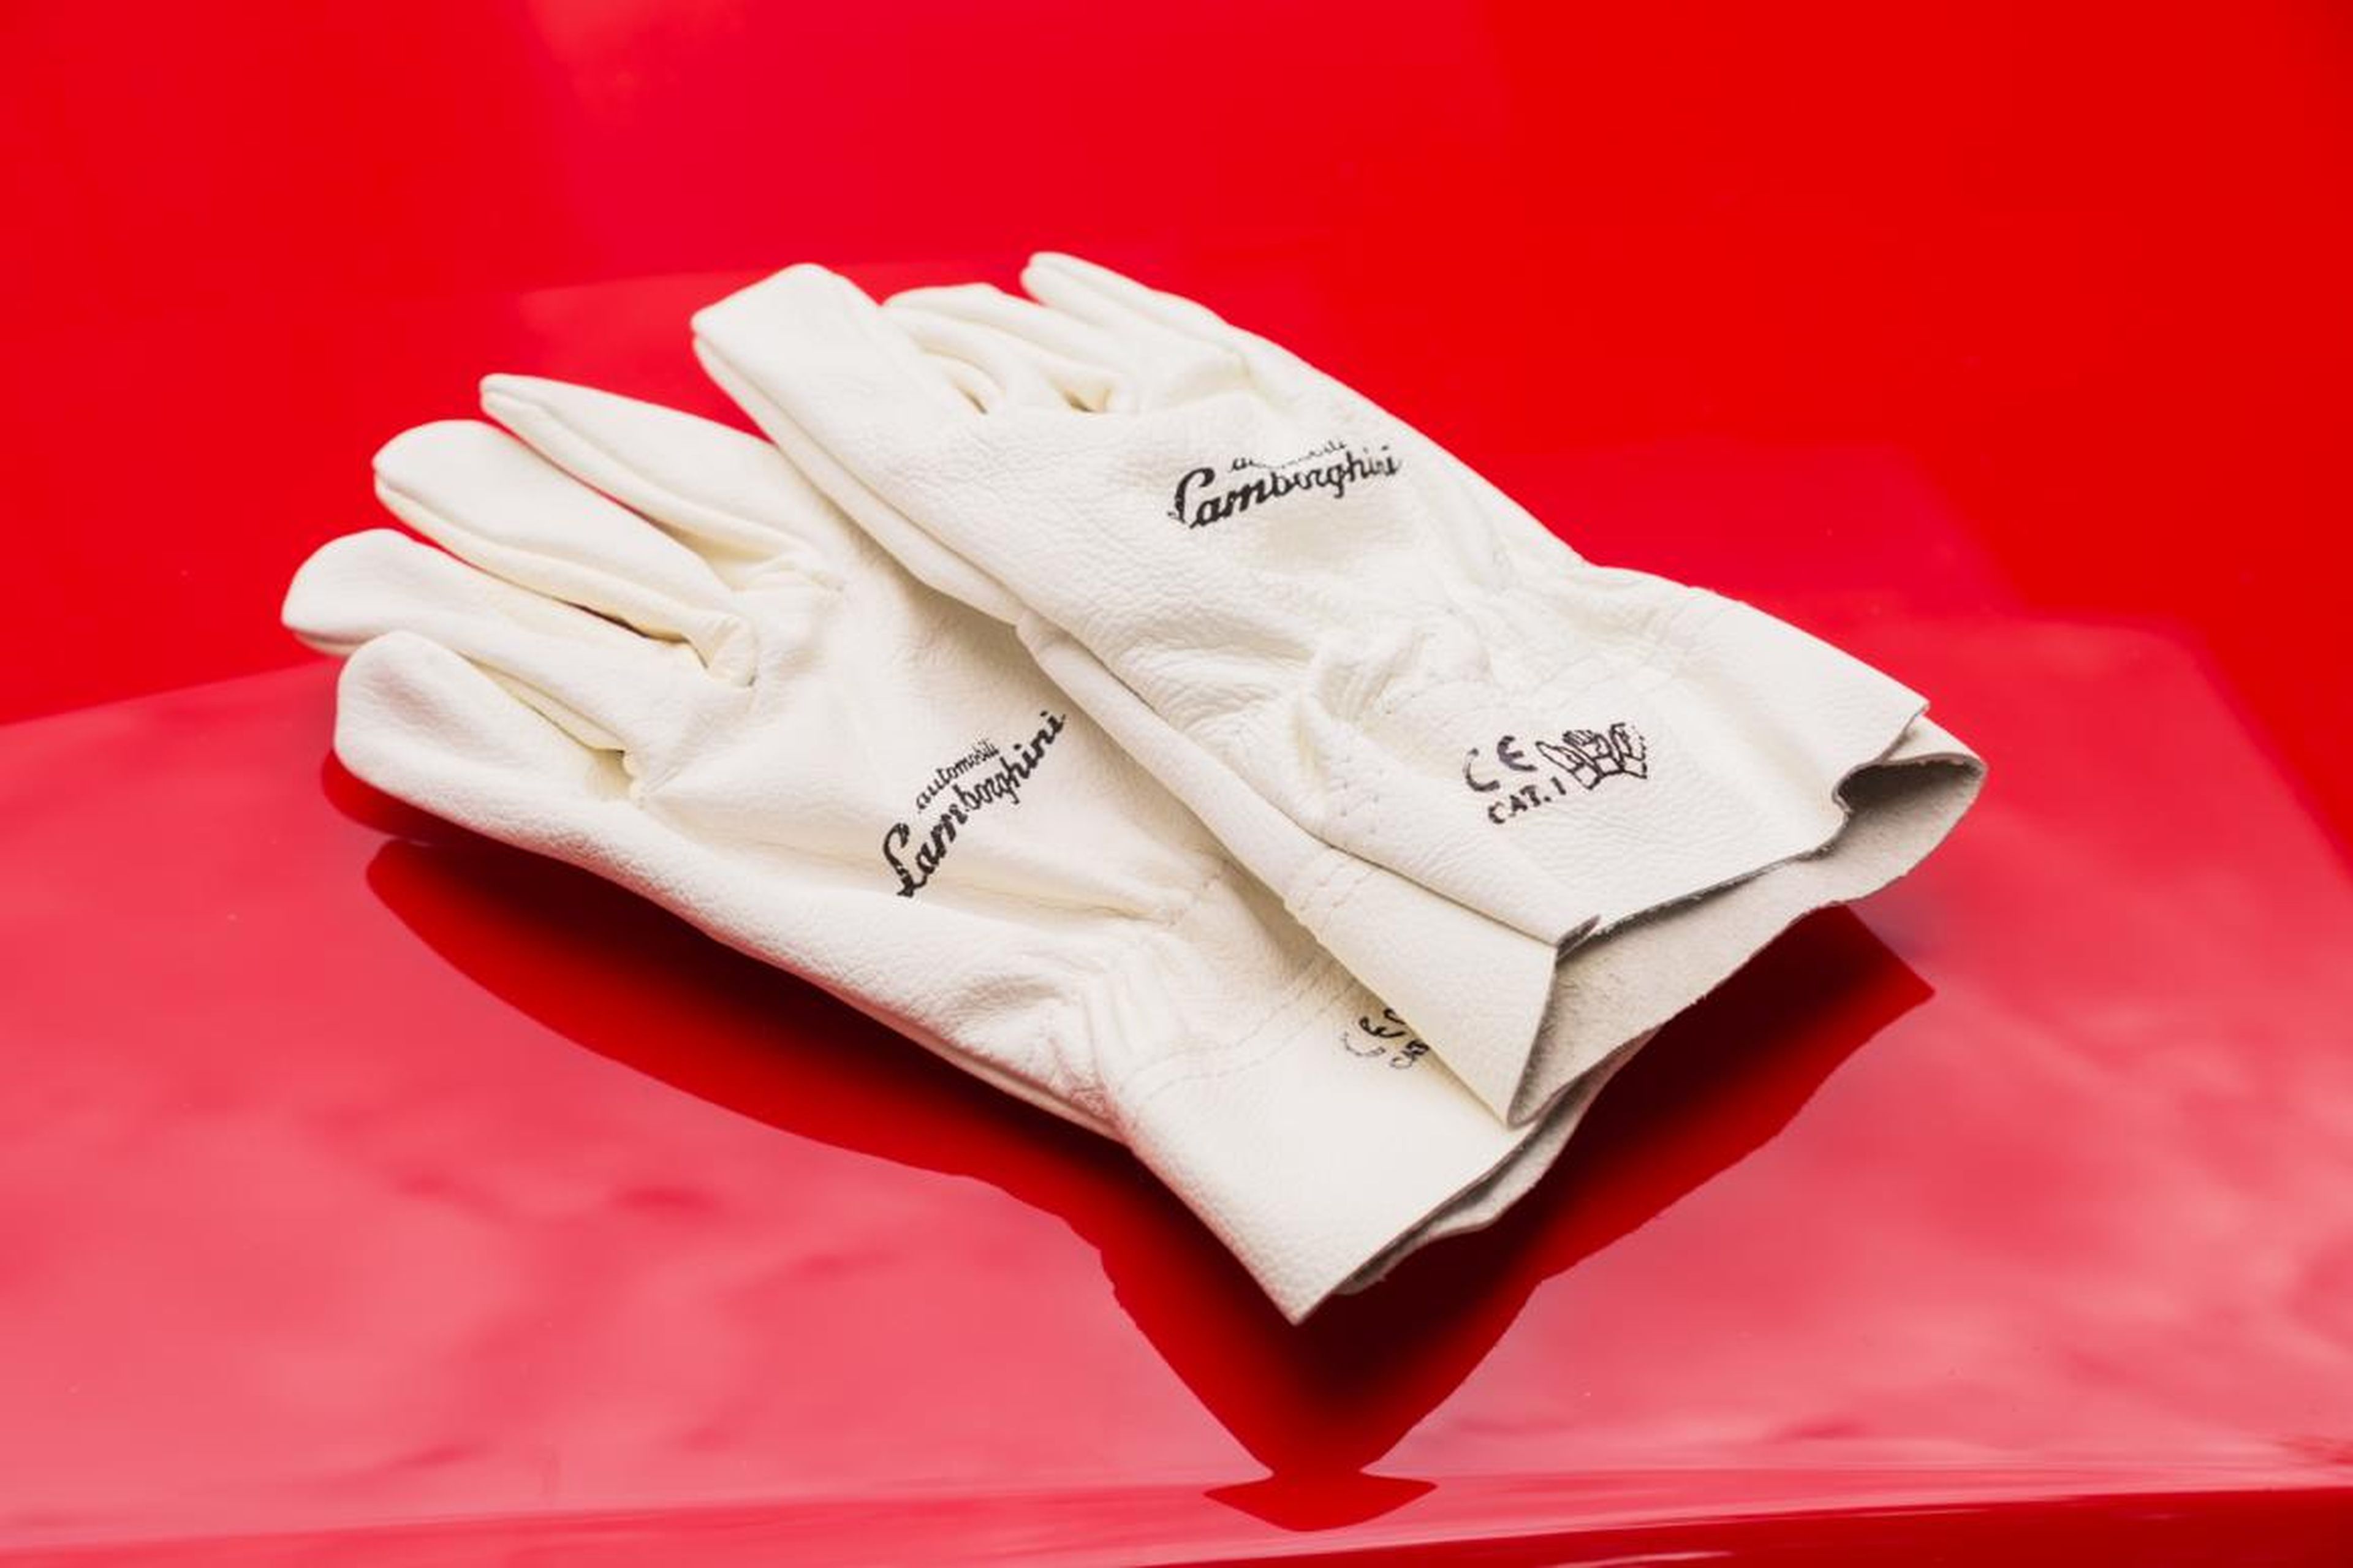 For example, a pair of white leather Lamborghini-branded gloves.